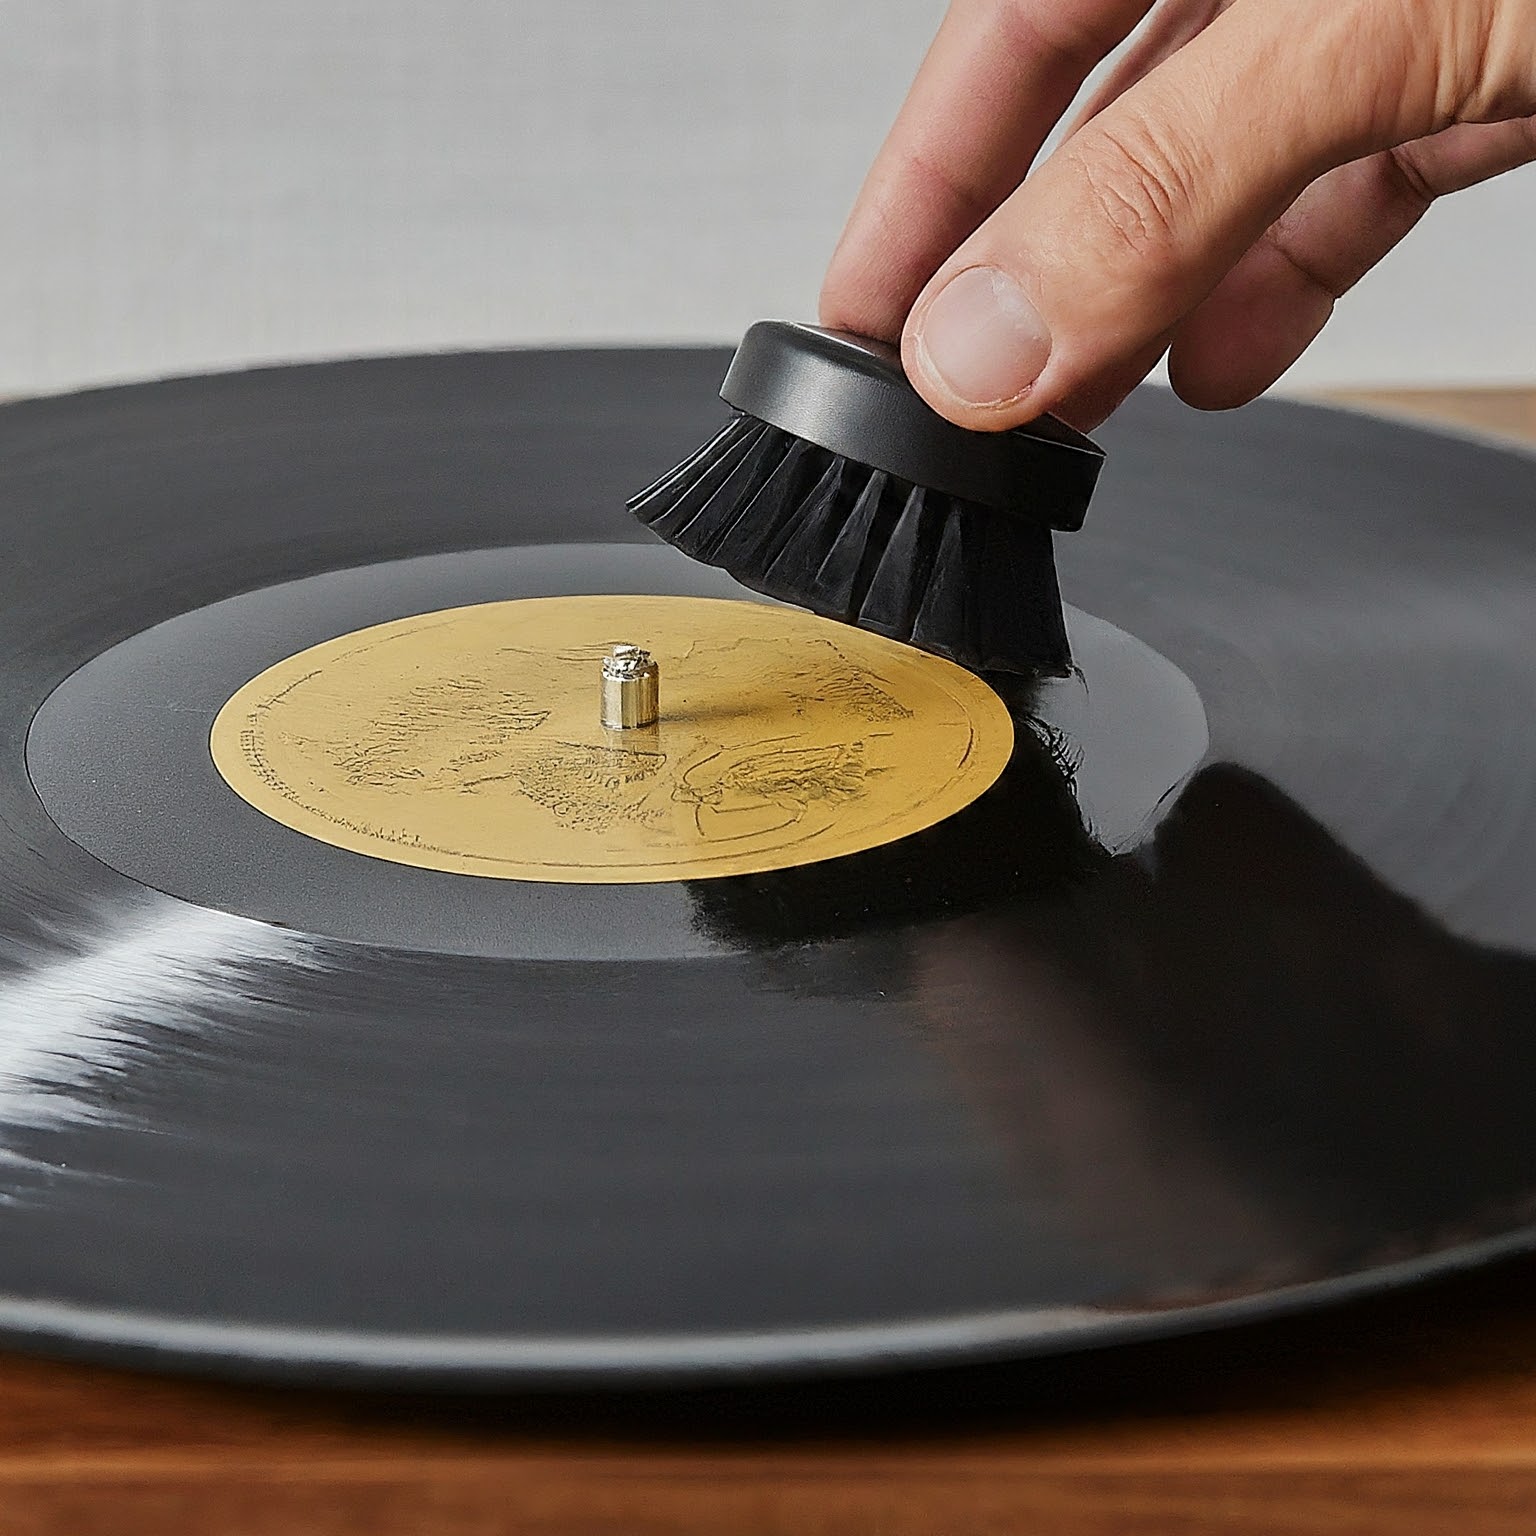 Lead image for a post about the best accessories for a record player